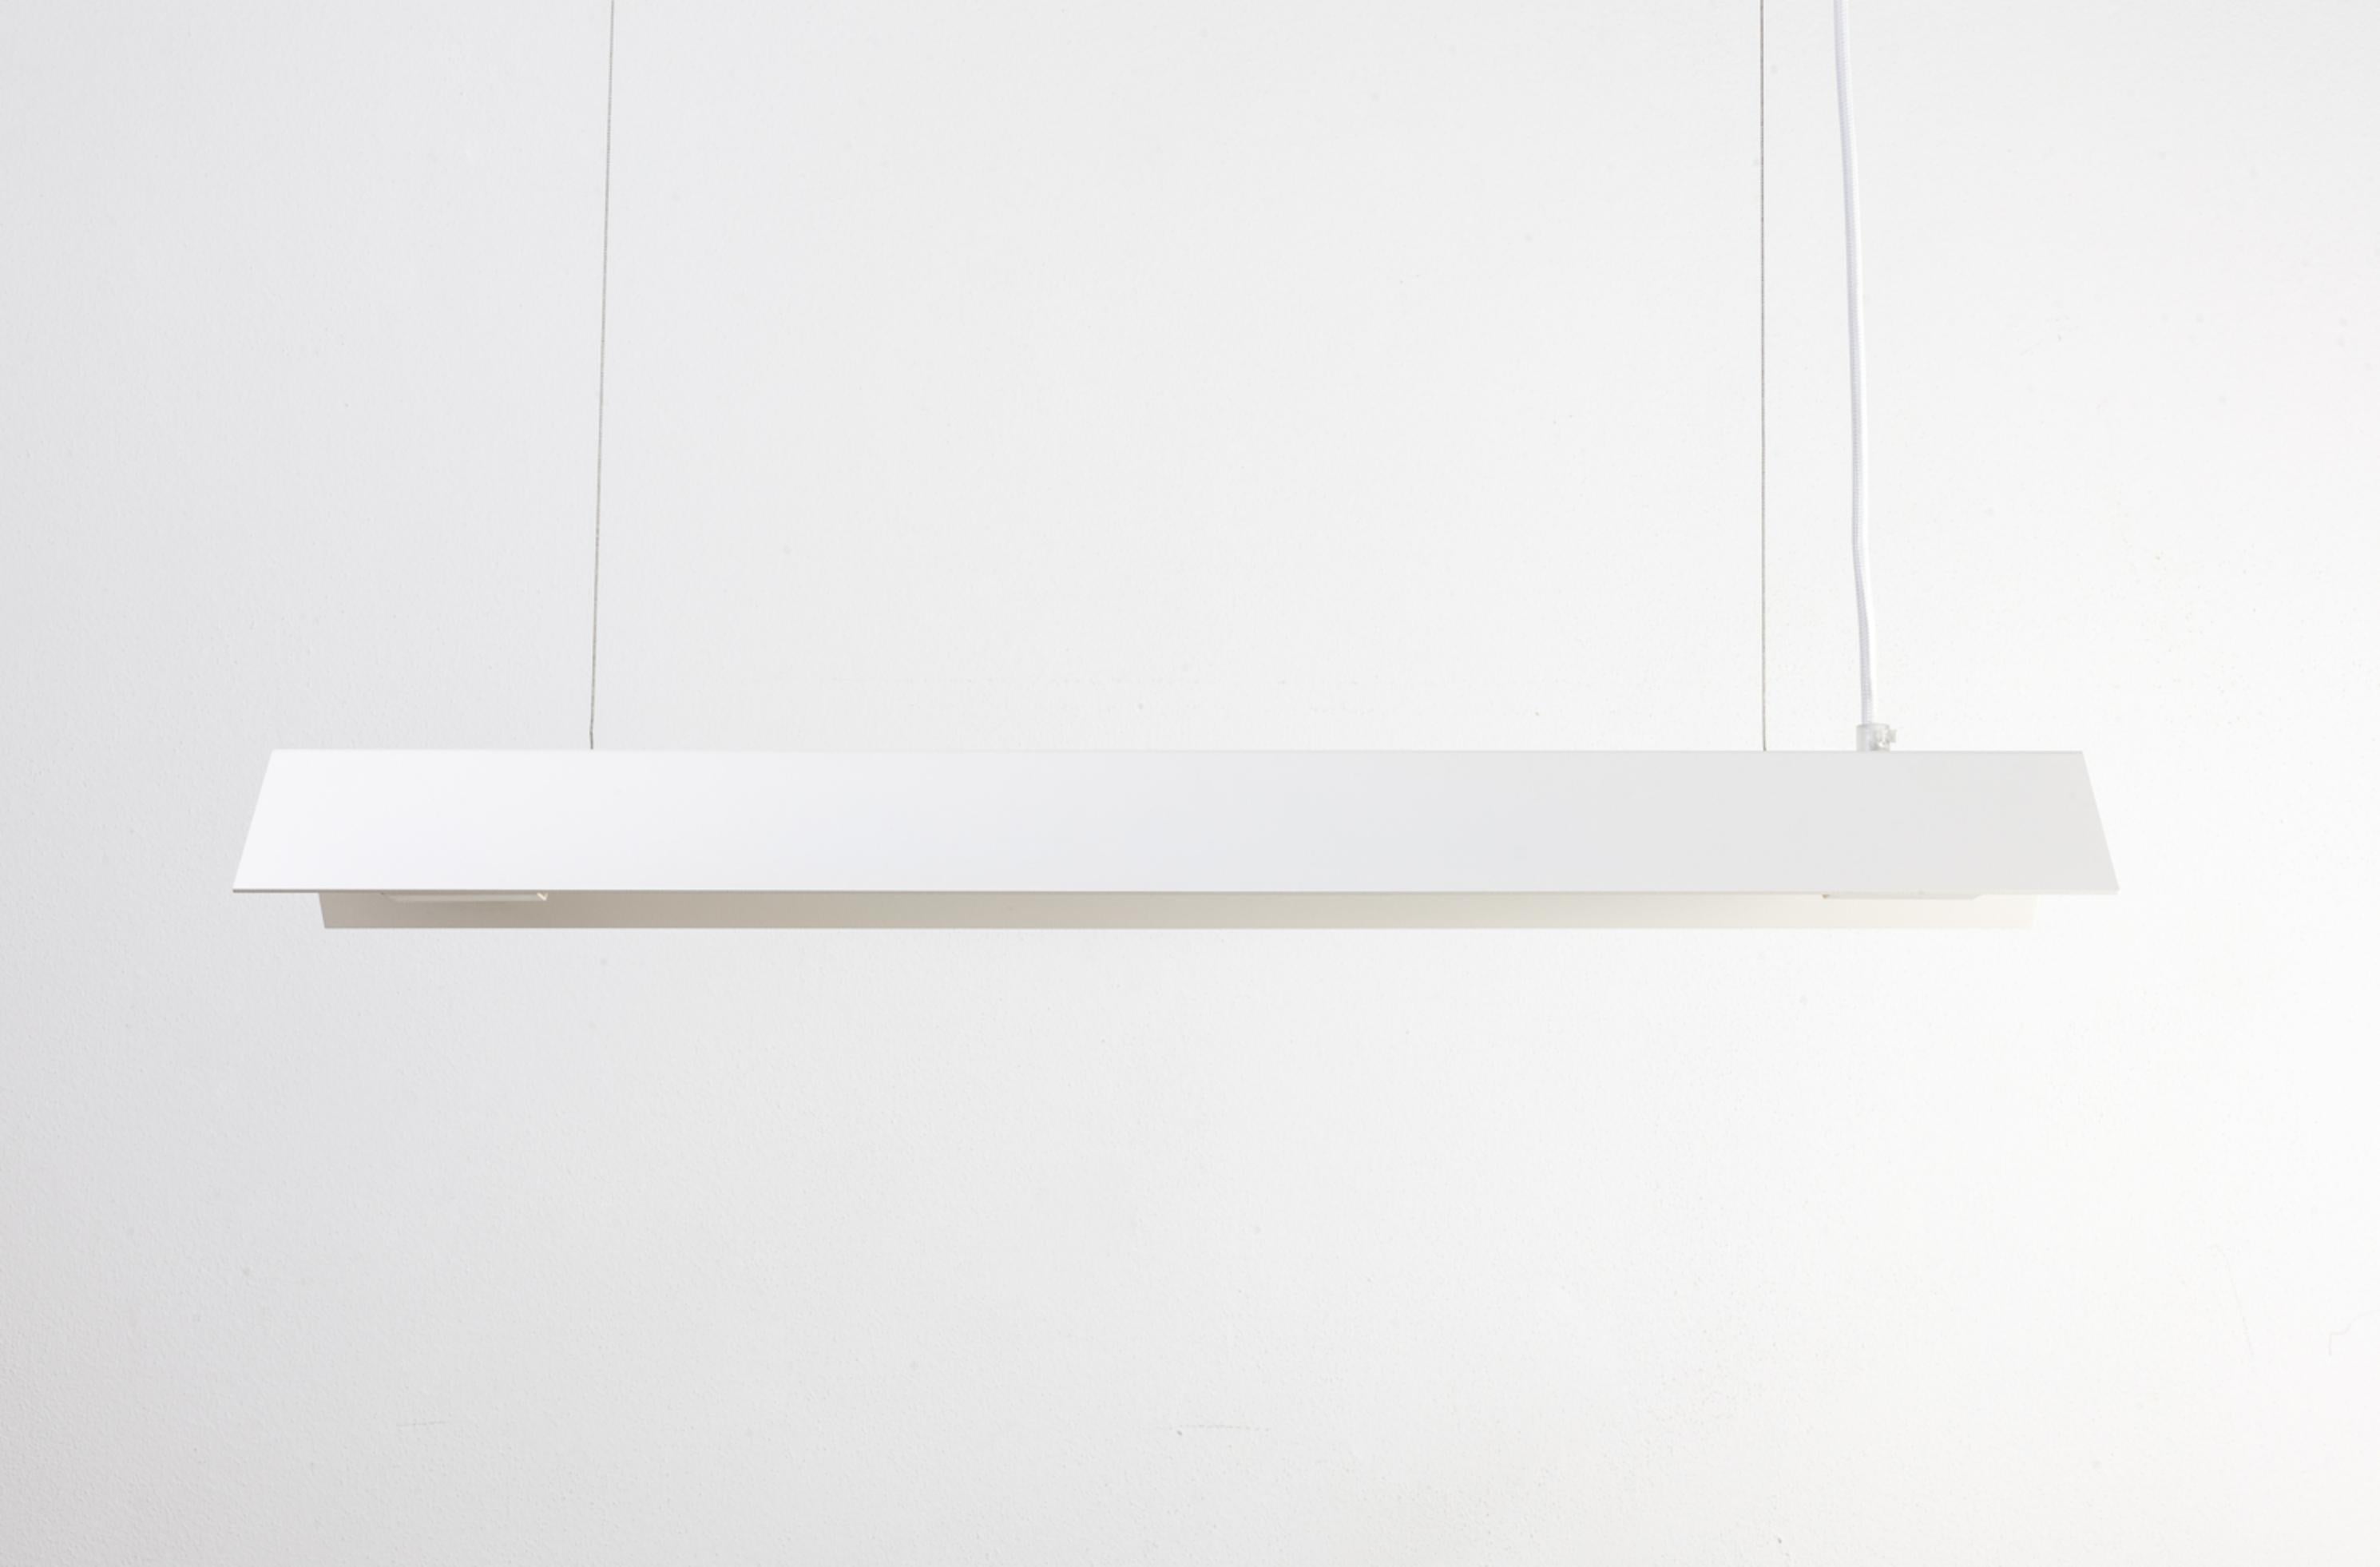 Small Misalliance ral pure white suspended light by Lexavala
Dimensions: D 16 x W 70 x H 8 cm
Materials: powder coated aluminium.

There are two lenghts of socket covers, extending over the LED. Two short are to be found in Suspended and